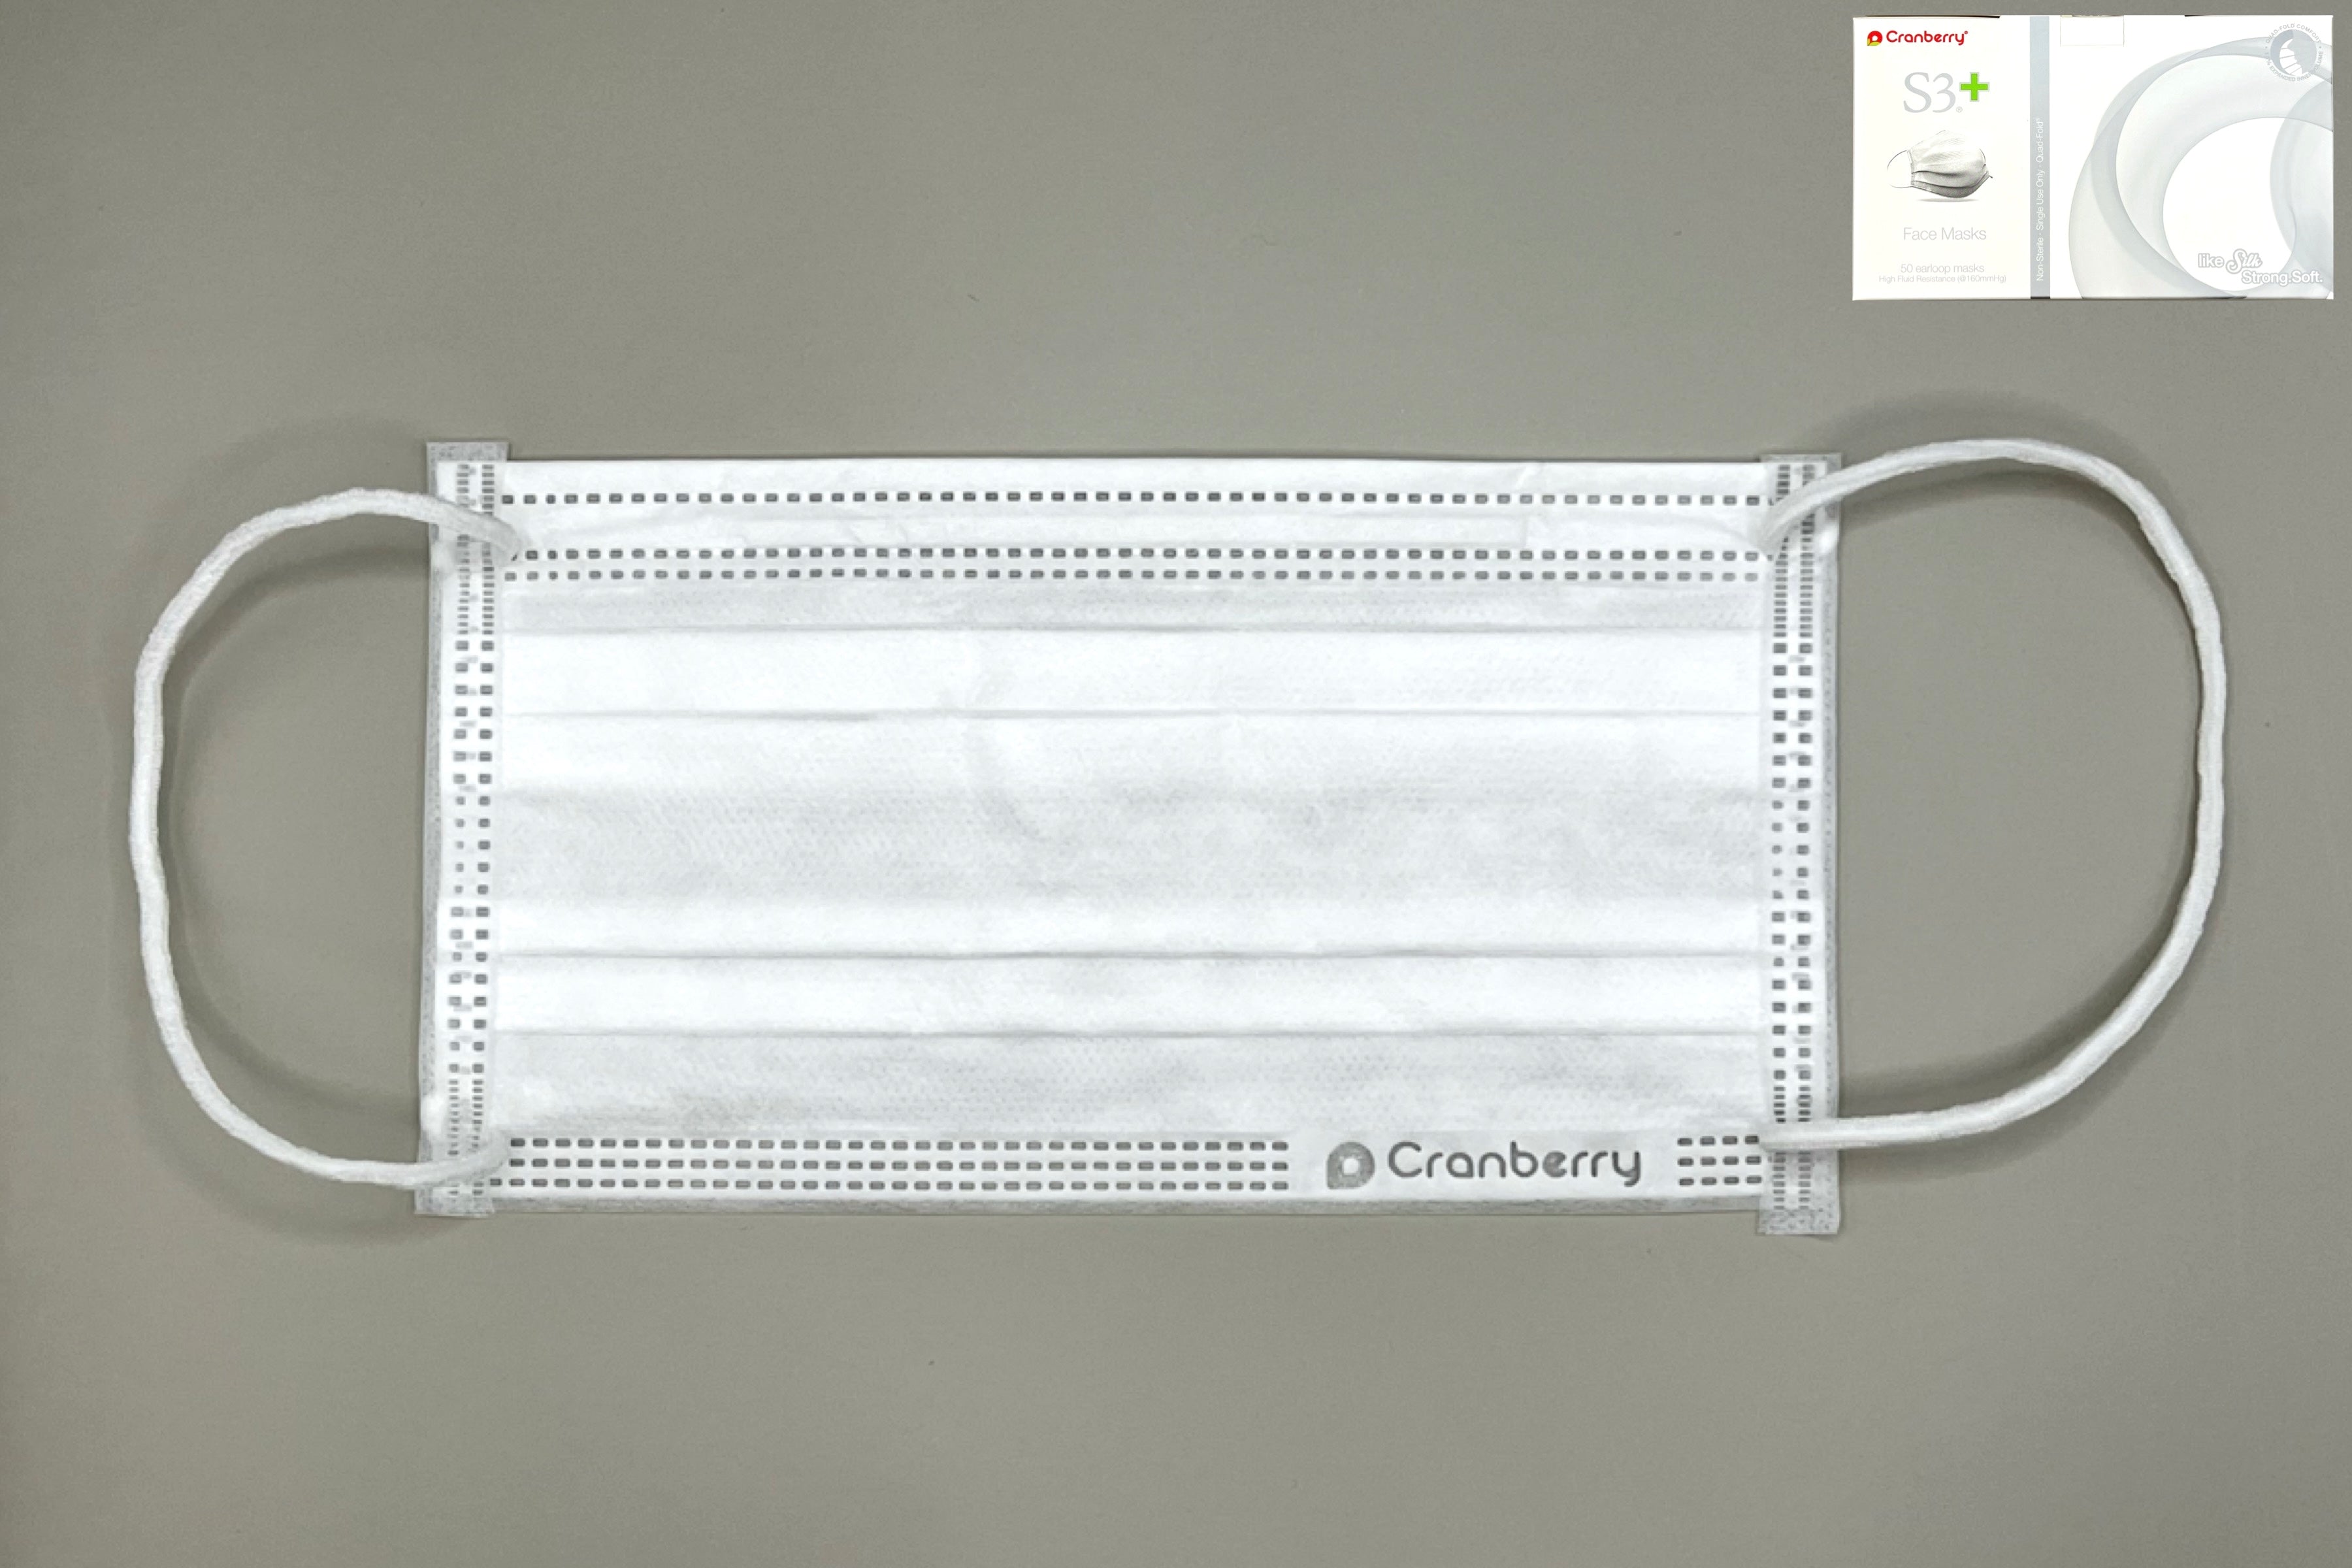 Cranberry S3+ (S3160W, White) Level 3 Surgical Face Mask with Ear 